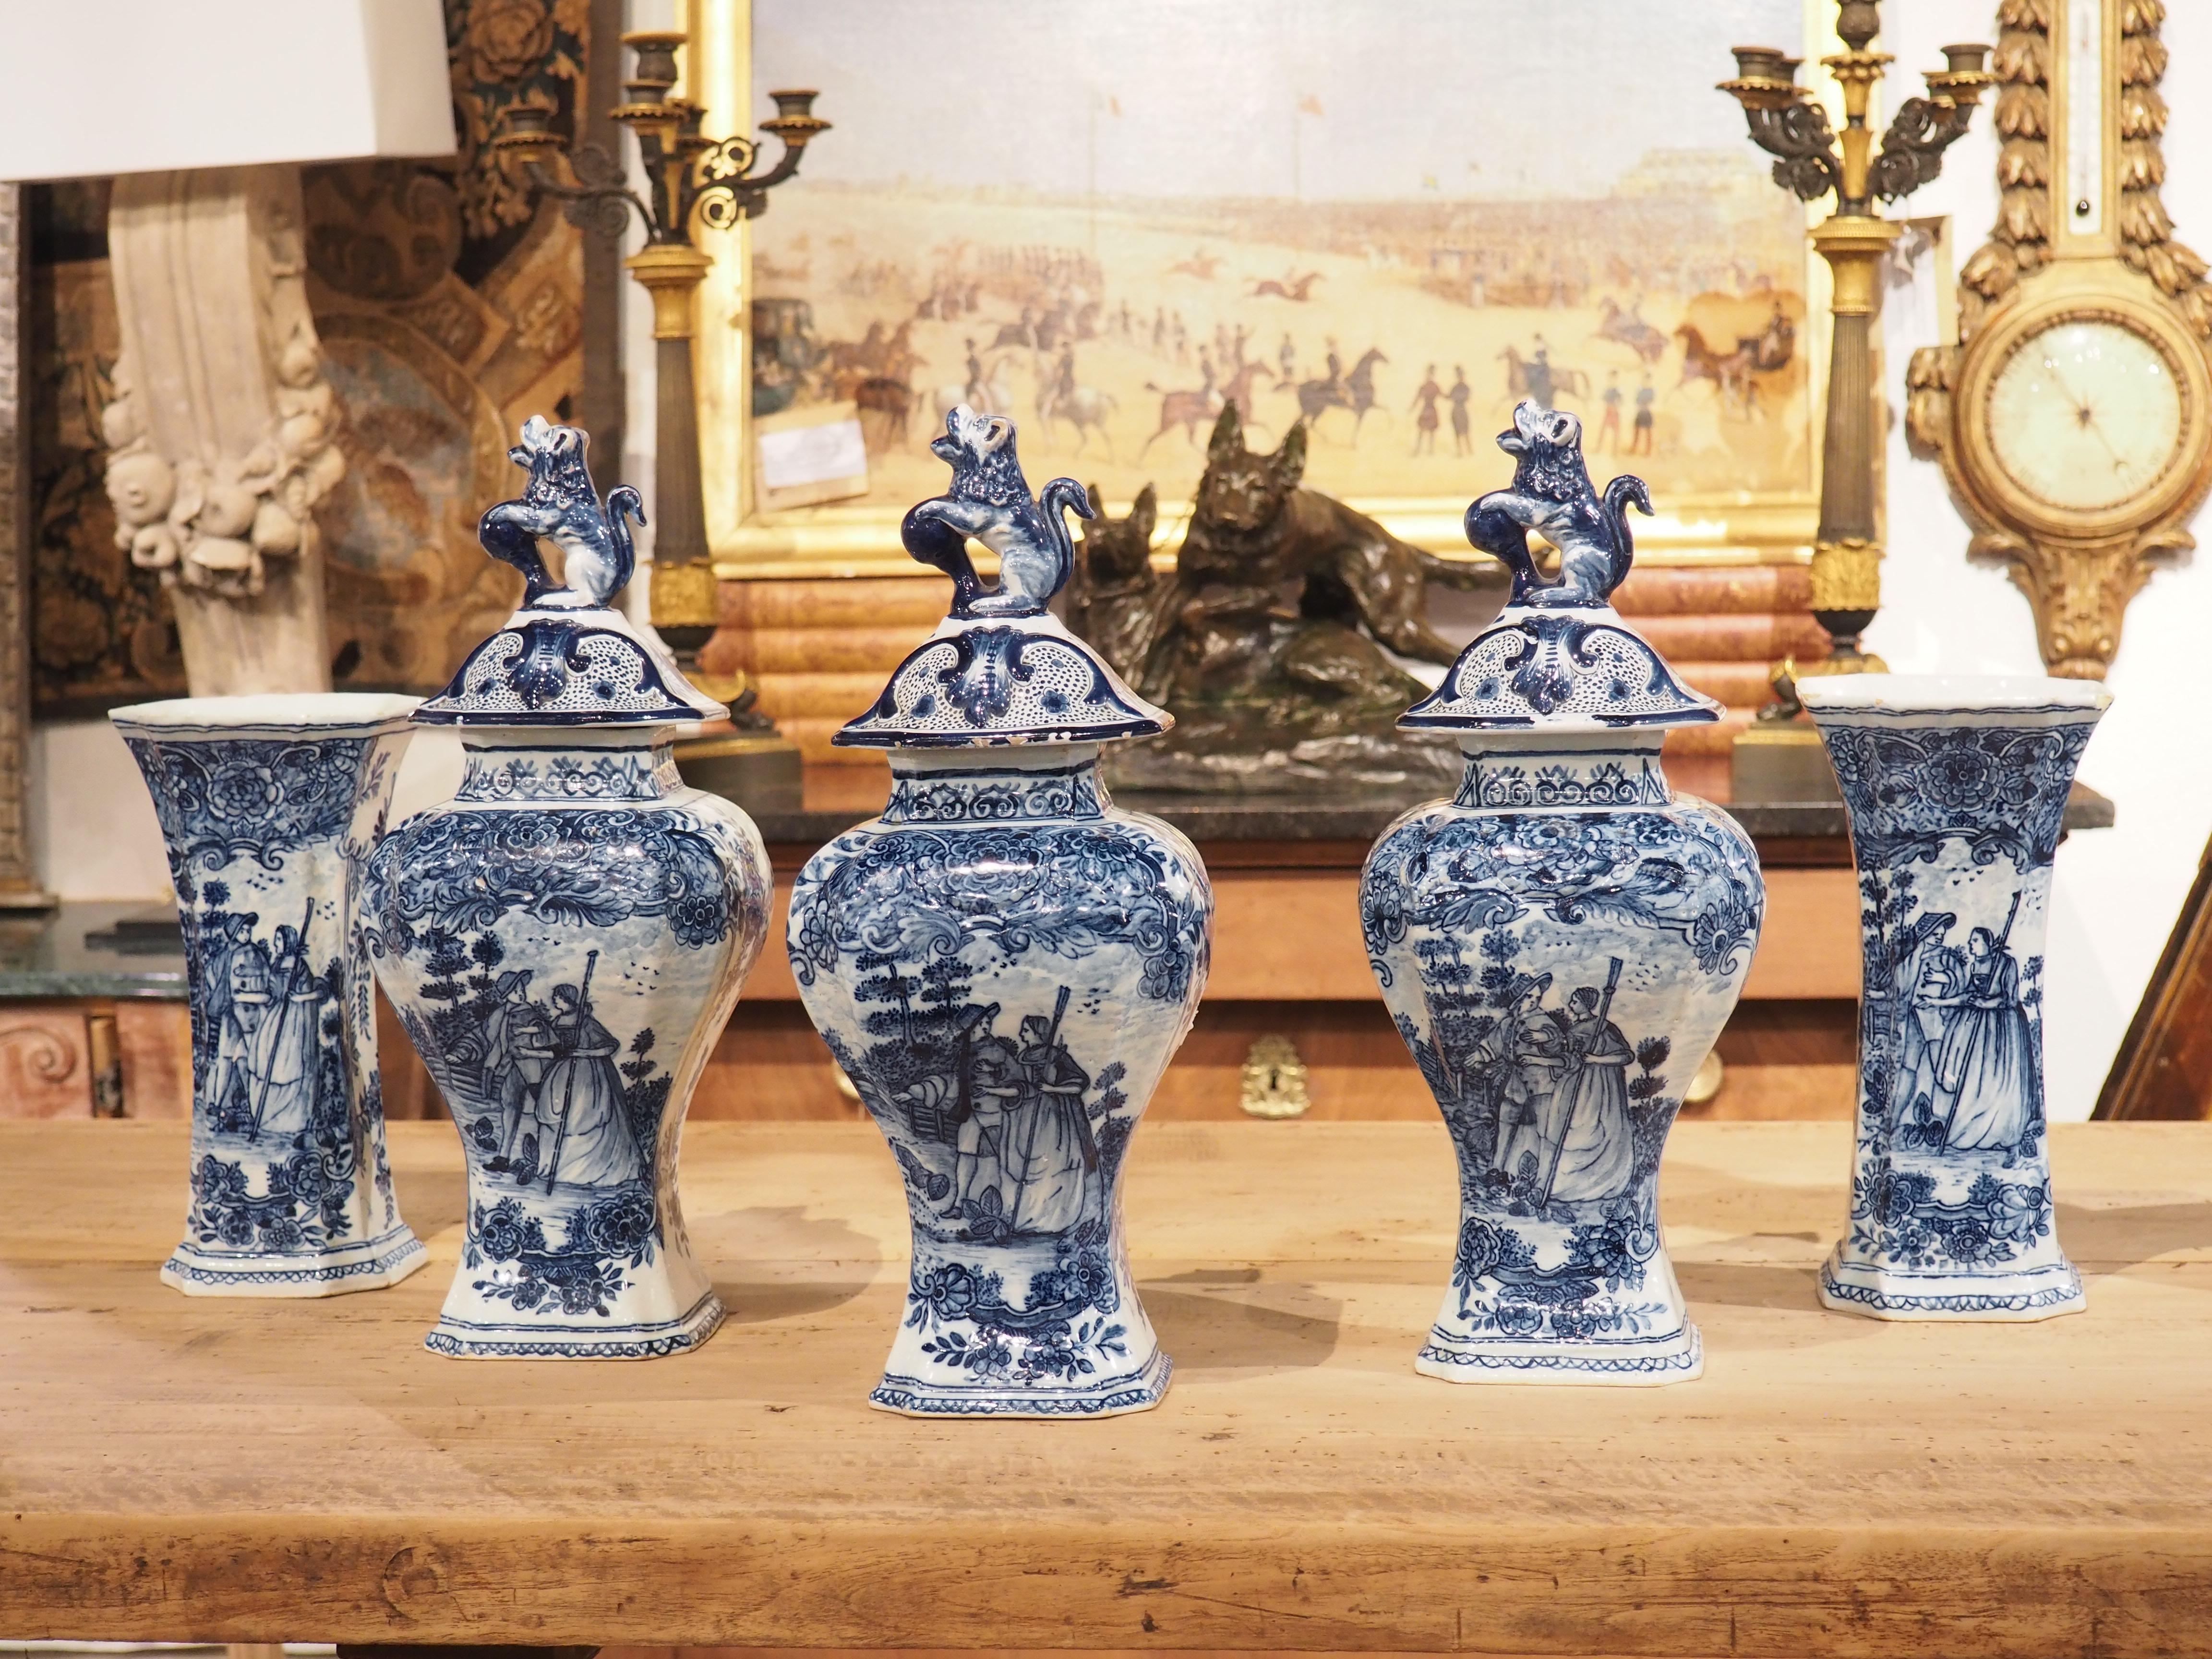 A beautiful set of five blue and white Delft vases, this faience collection was hand-painted in Holland, circa 1900. The three bulbous vases are lidded, each with a finial depicting a rampant lion with a ball in its forepaws. Beneath the lion is a